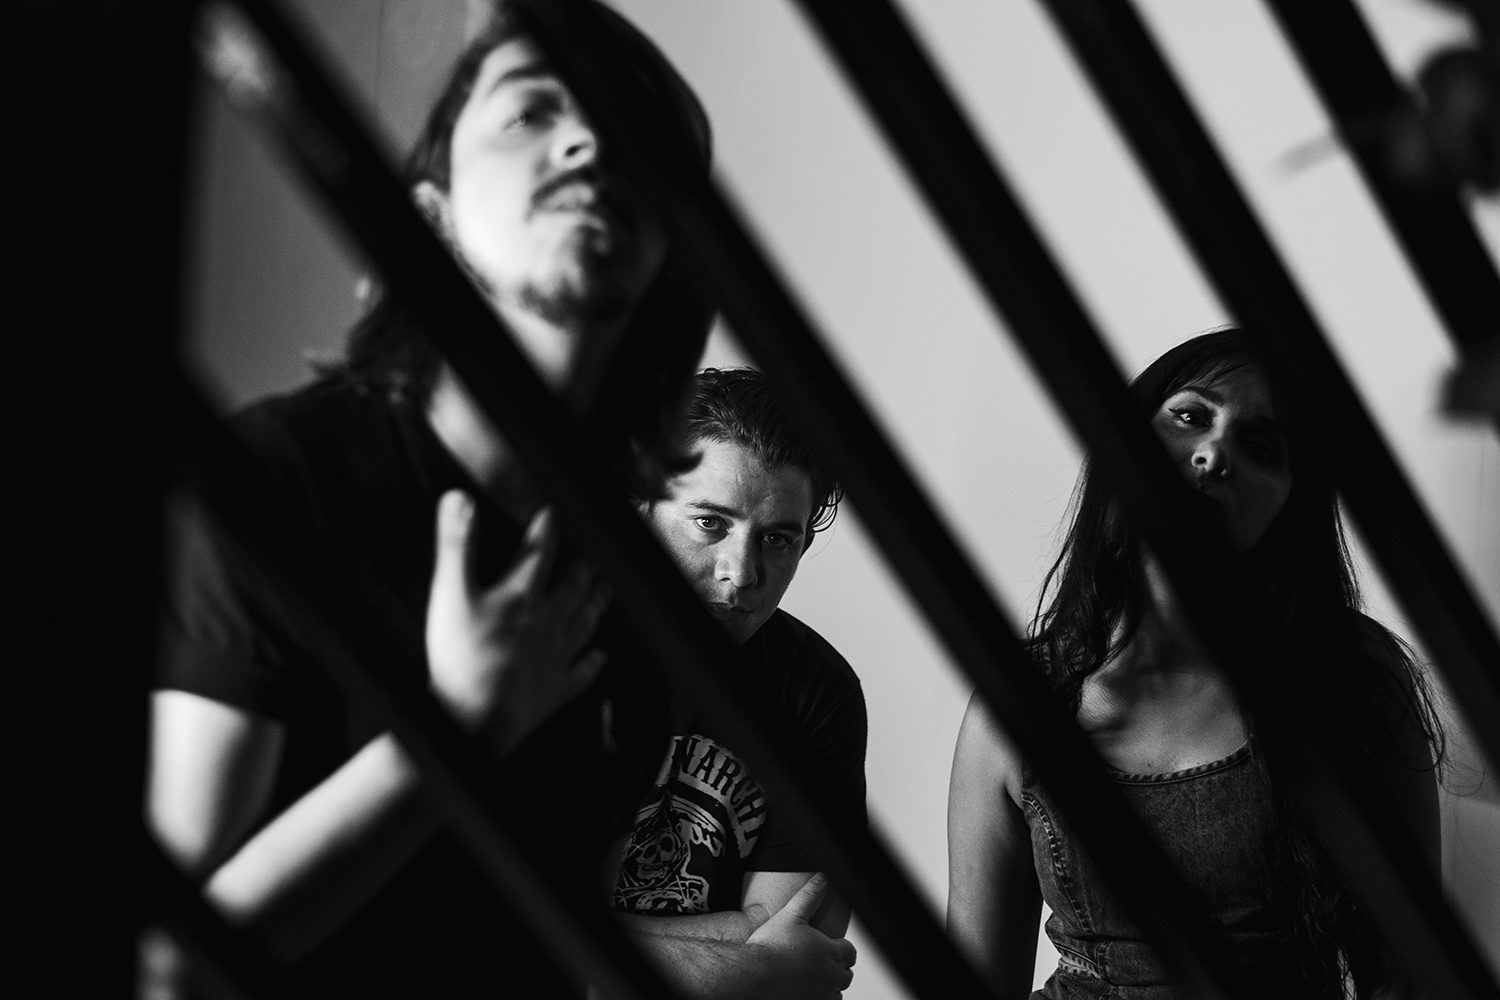 Alternative band from Brazil Please Use Right Excuses drop new EP ‘Pure Quarantine’